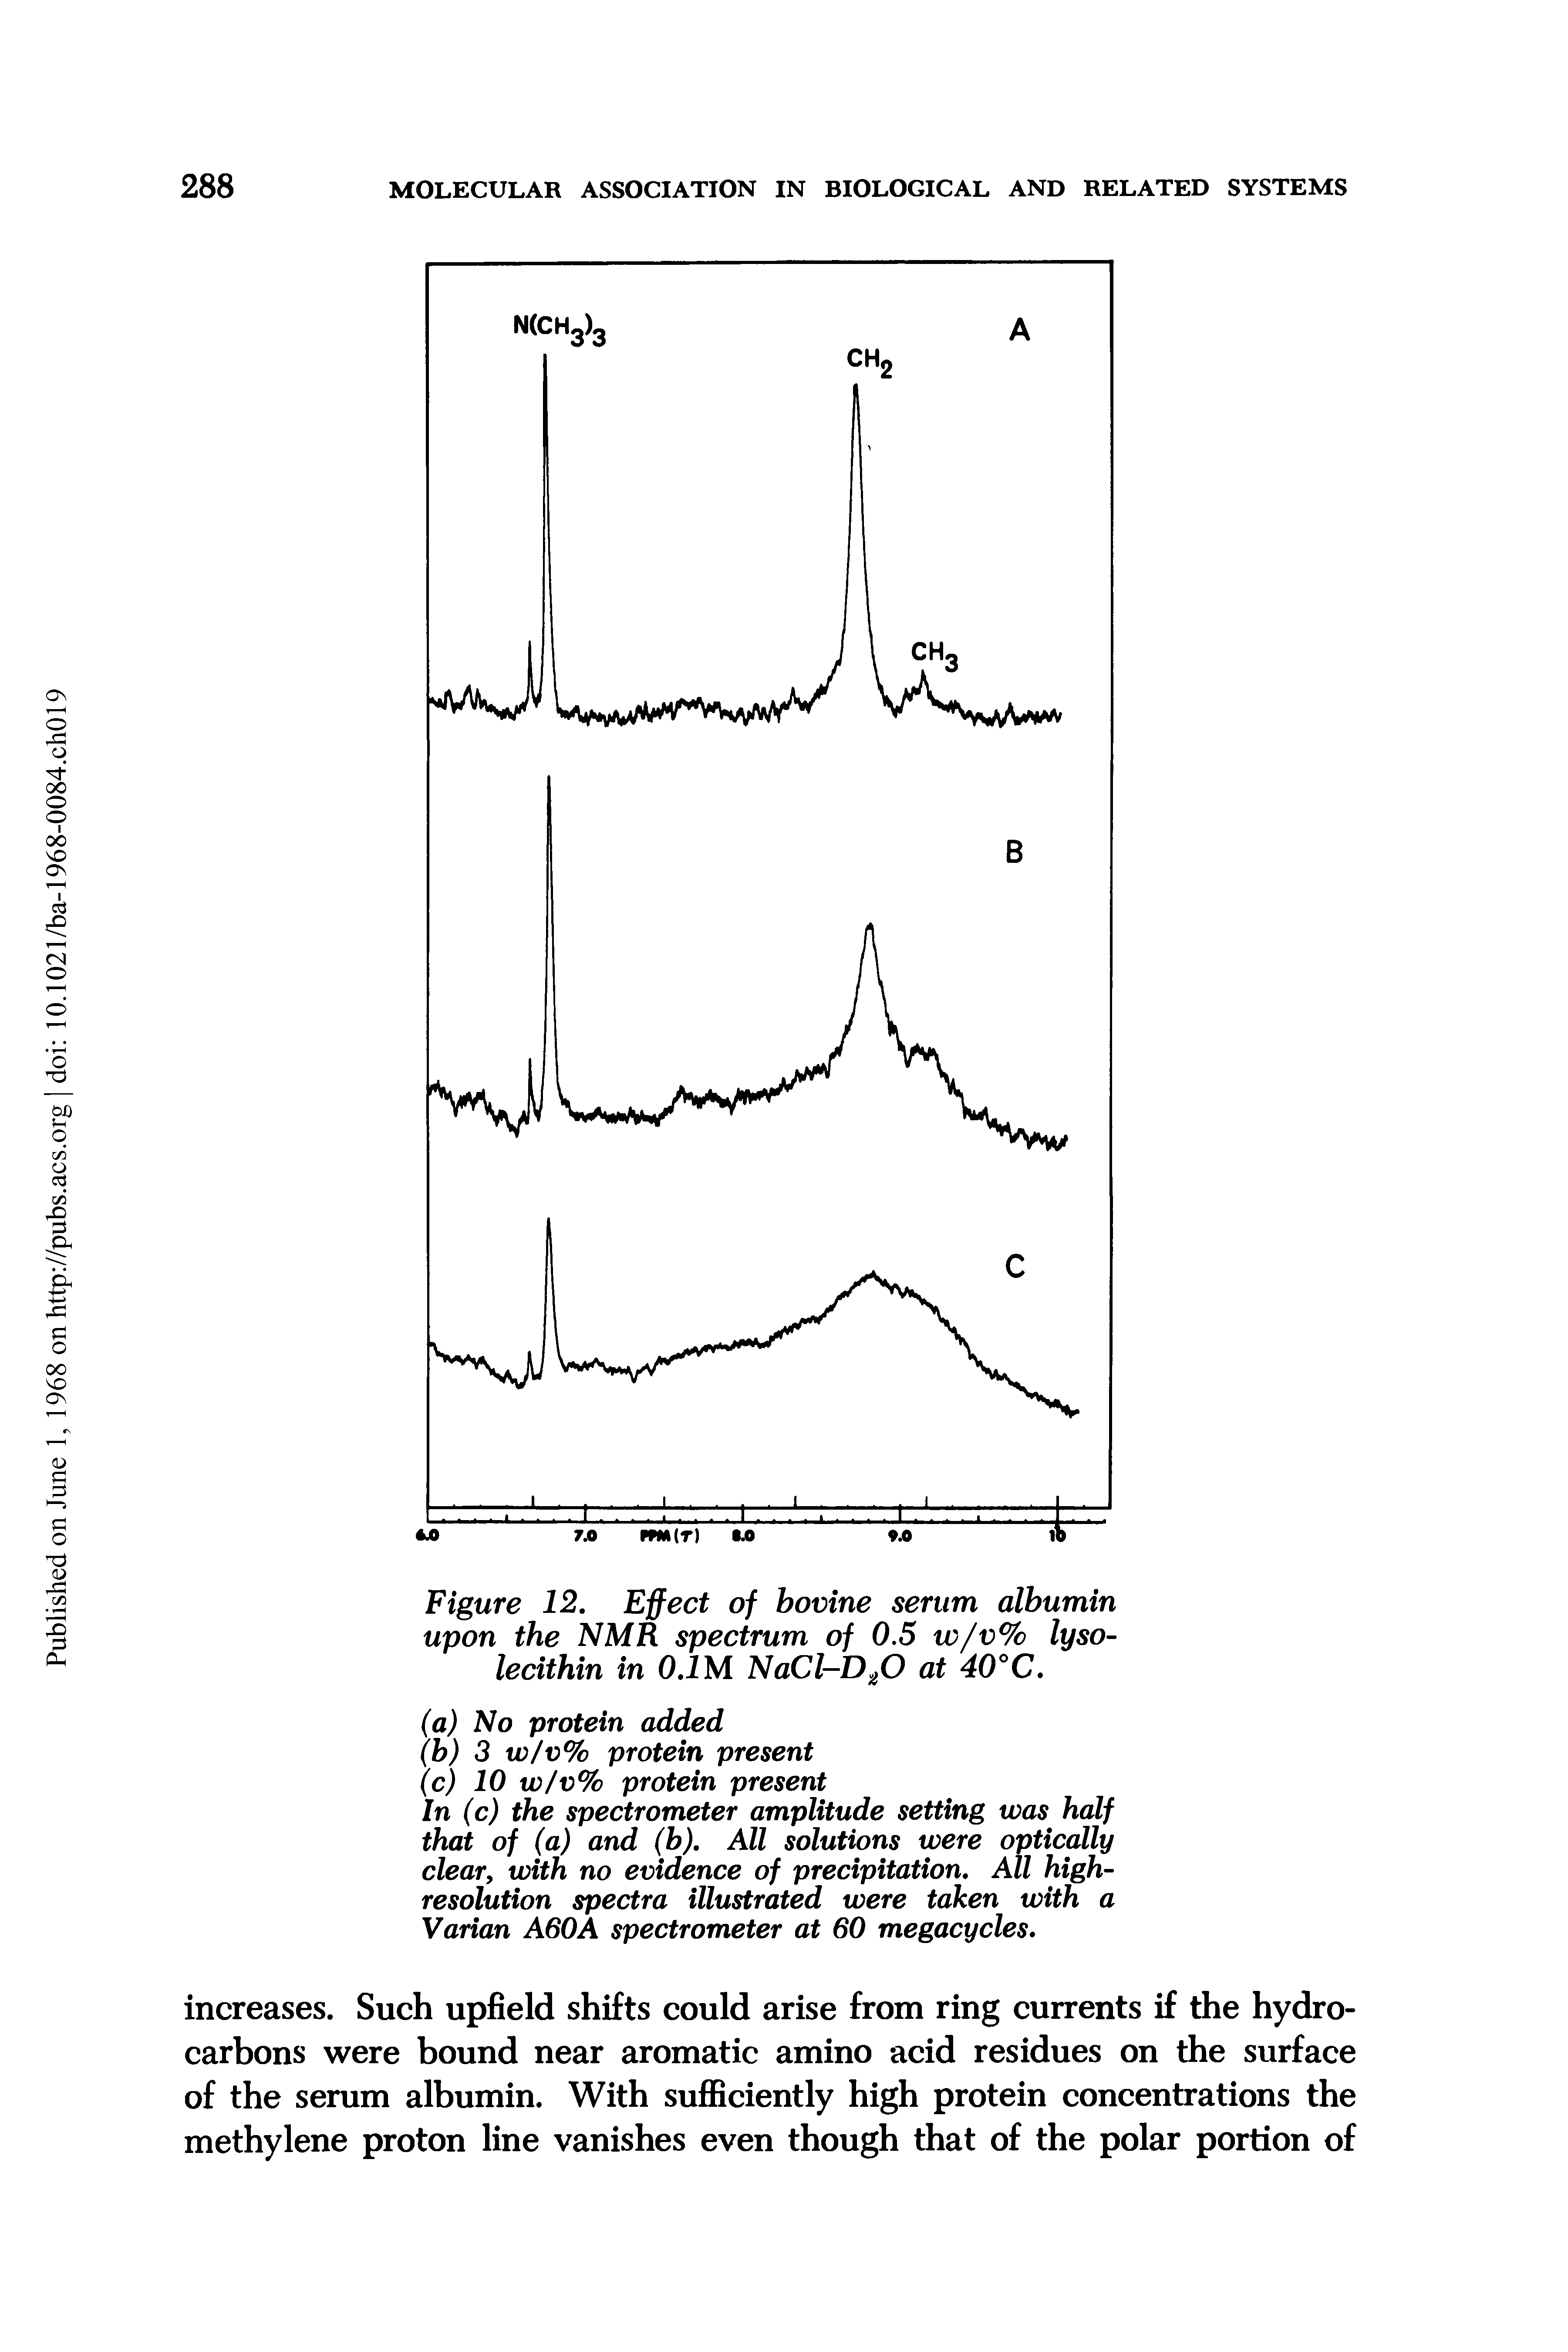 Figure 12. Effect of bovine serum albumin upon the NMR spectrum of 0.5 w/v% lyso-lecithin in 0.1M NaCl-D20 at 40°C.